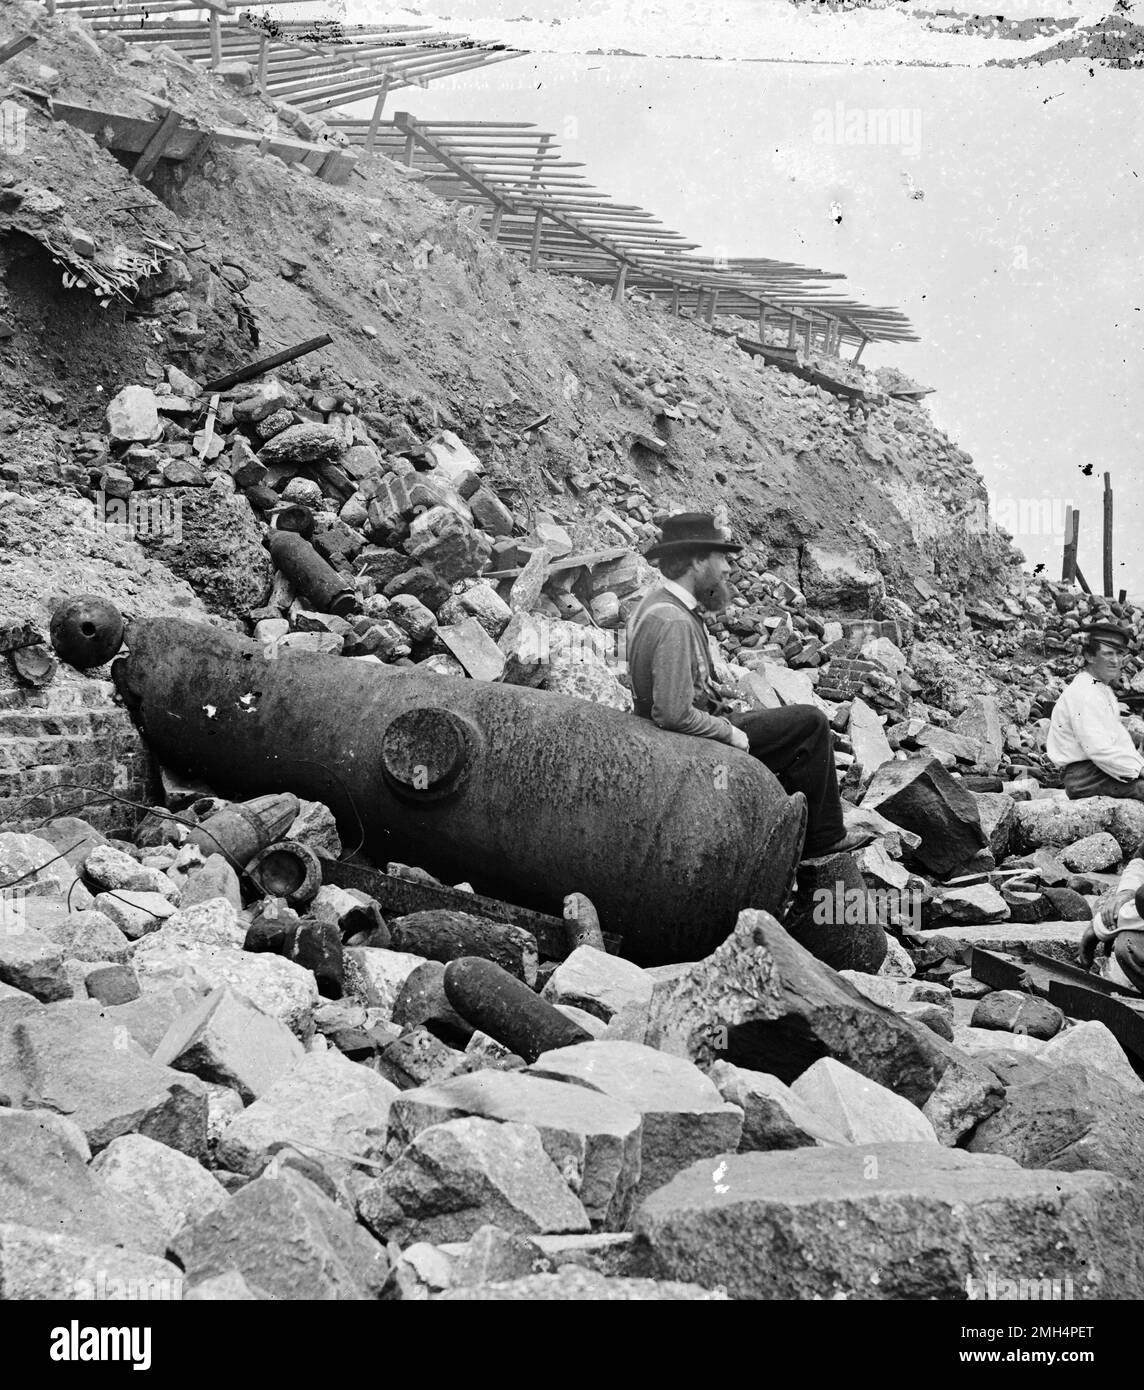 The ruins of Fort Sumter after is capture by the Confederate Army. The Confederate bombardment and capture of Fort Sumter was the opening battle in the American Ciil War. Stock Photo